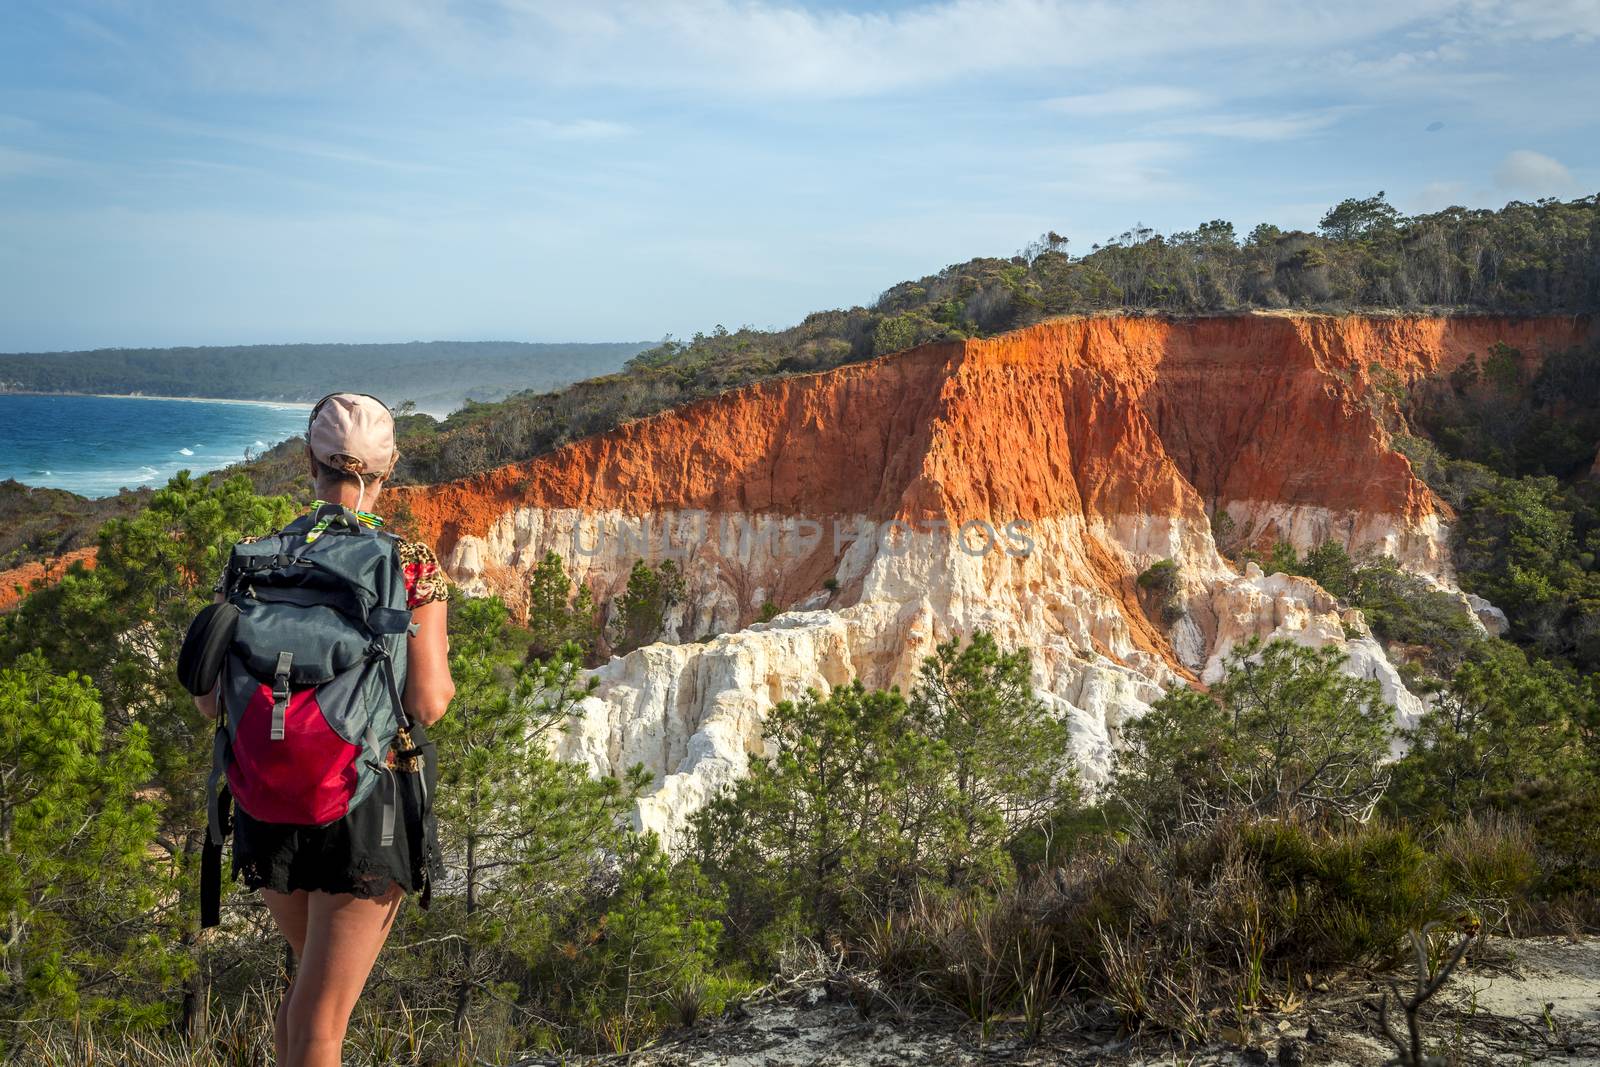 A woman traveller takes in the views of the amazing Pinnacles formation – a spectacular erosion feature that consists of cliffs of soft white sands capped with a layer of red gravel clay. It was deposited during the Tertiary geological period about 65 million years ago.